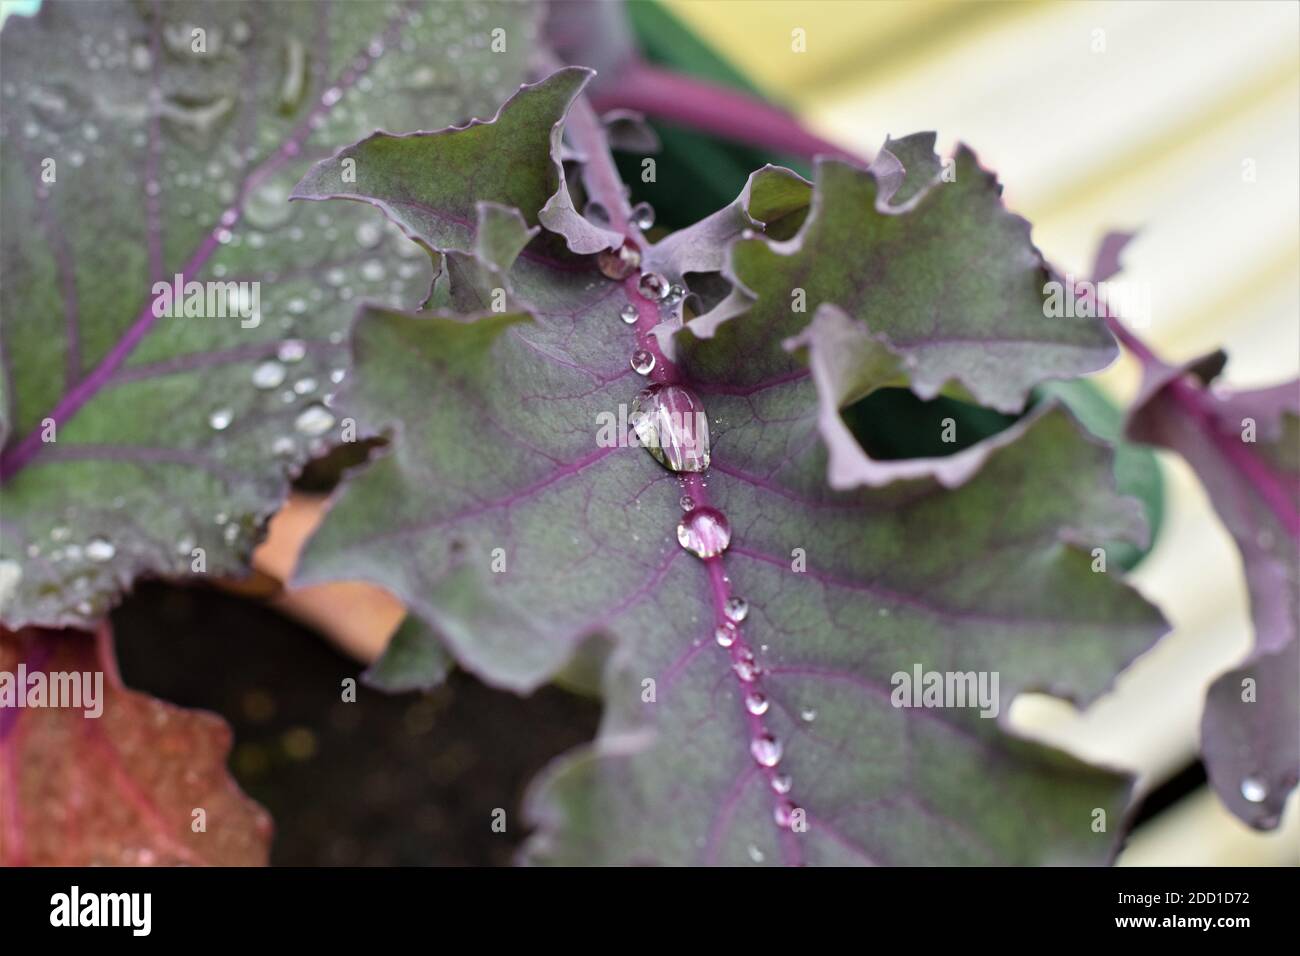 Dew drops on purple cabbage leaf as close up Stock Photo